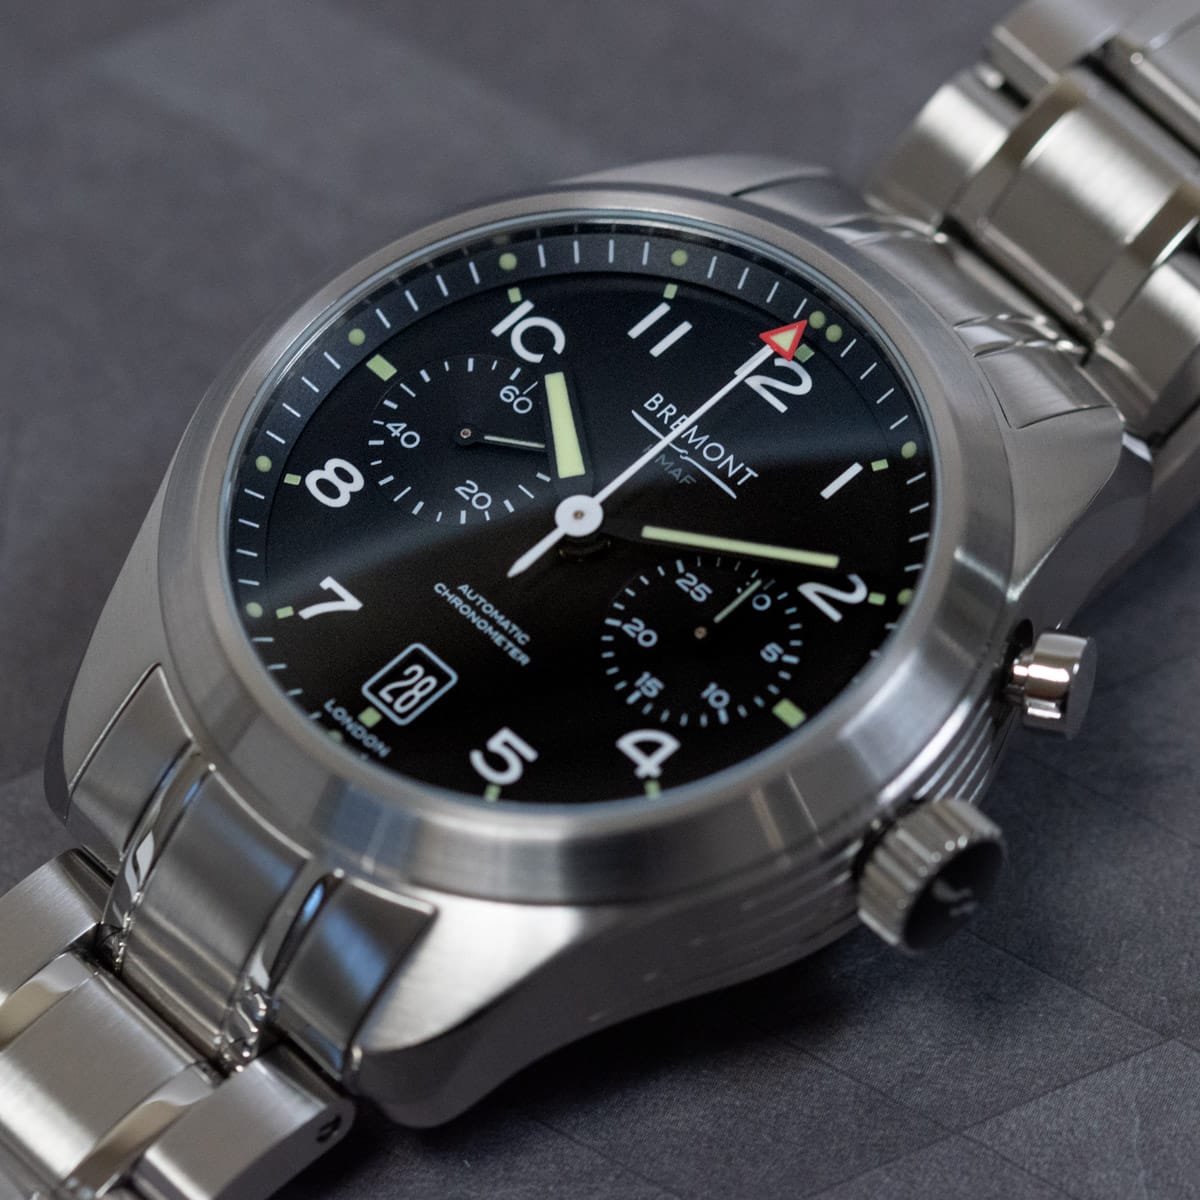 Stylied photo of  of Arrow Chronograph